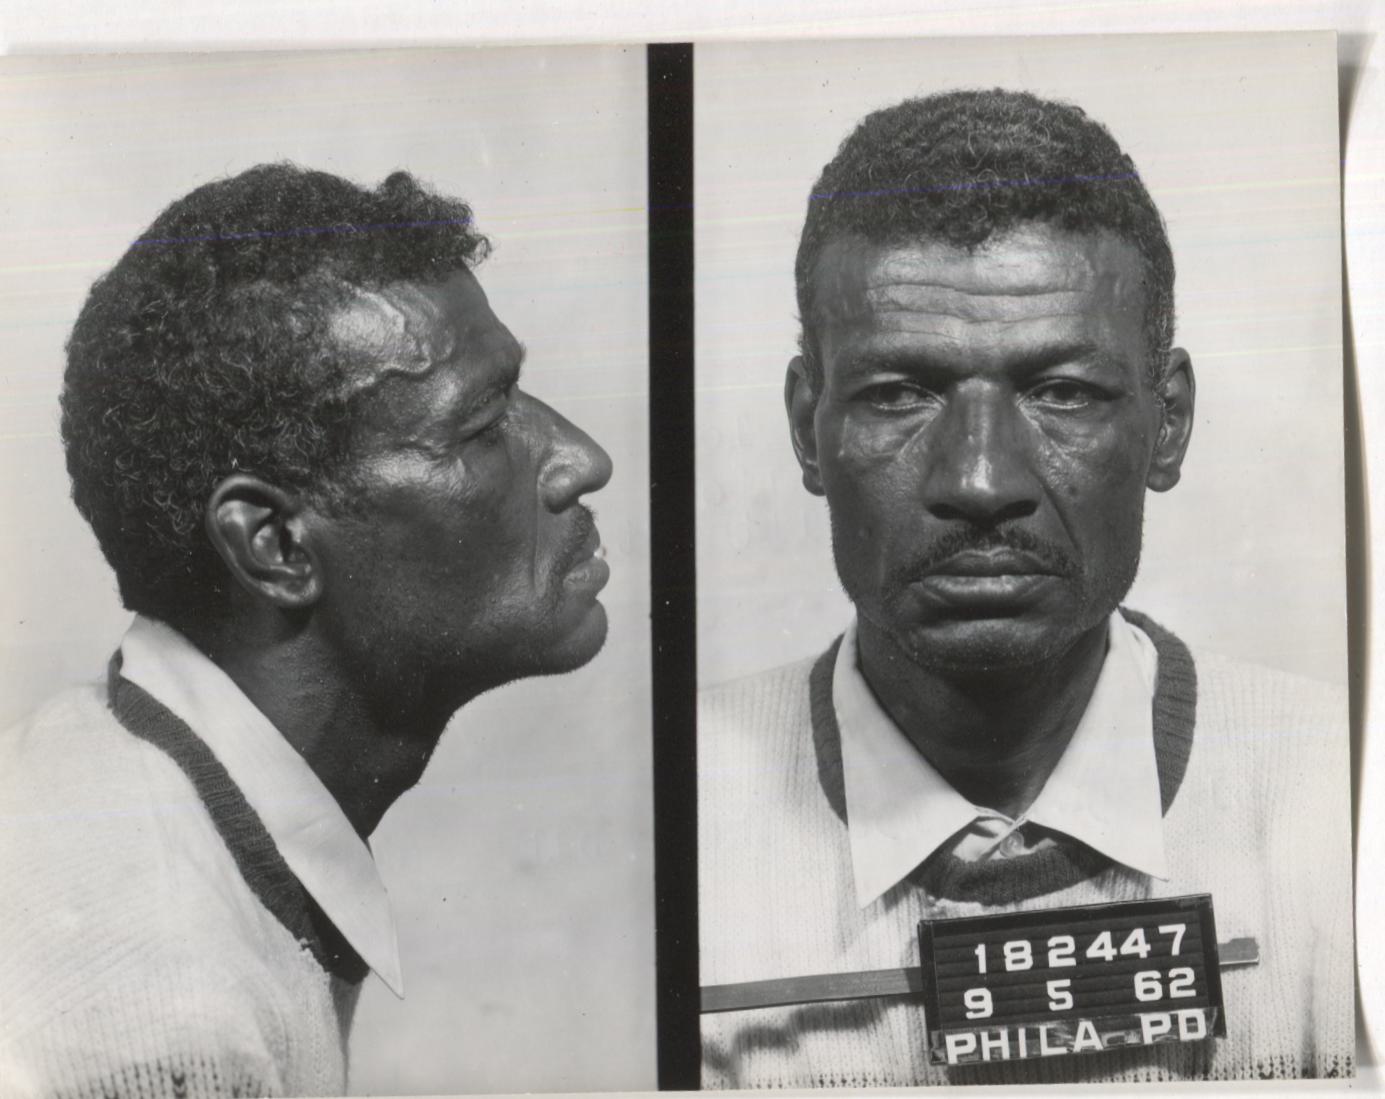 Frank Charley Mugshot - Arrested on 9/5/1962 for Illegal Lottery